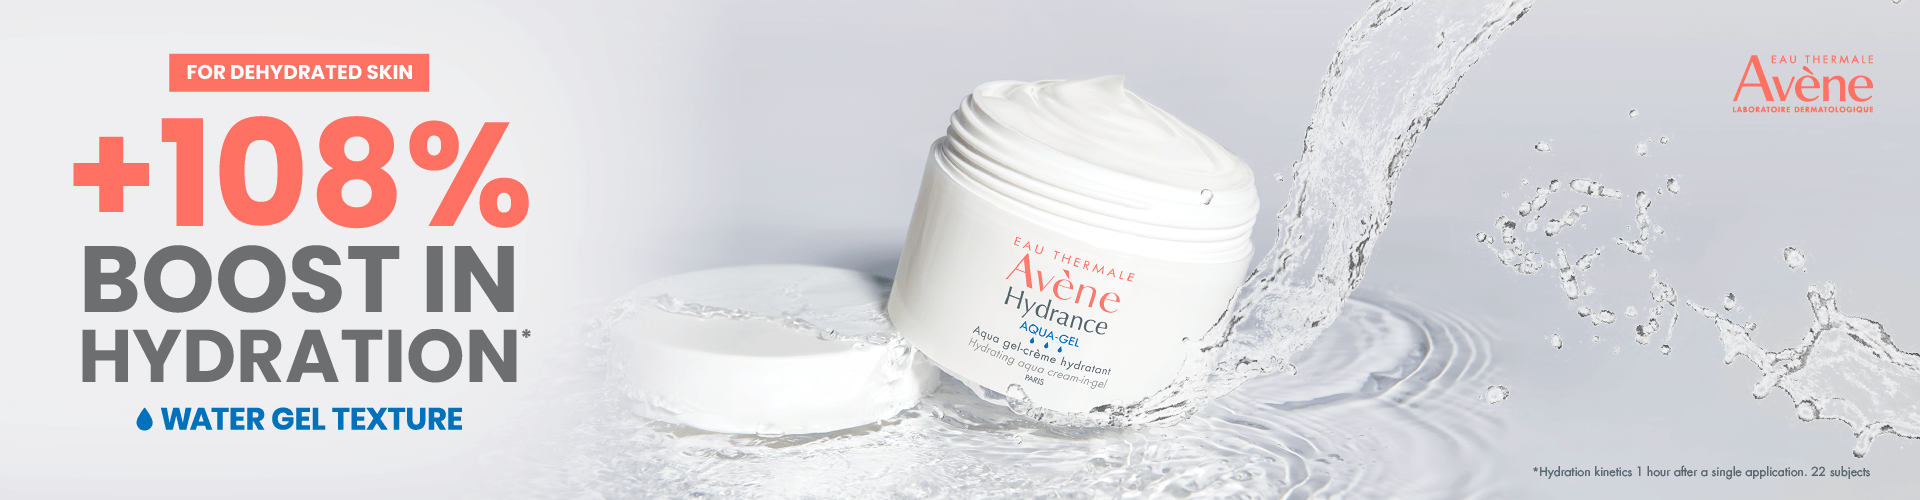 Avene Hydrance Aqua-Gel offers a 108% boost in hydration with a water gel texture. Perfect for dehydrated skin.